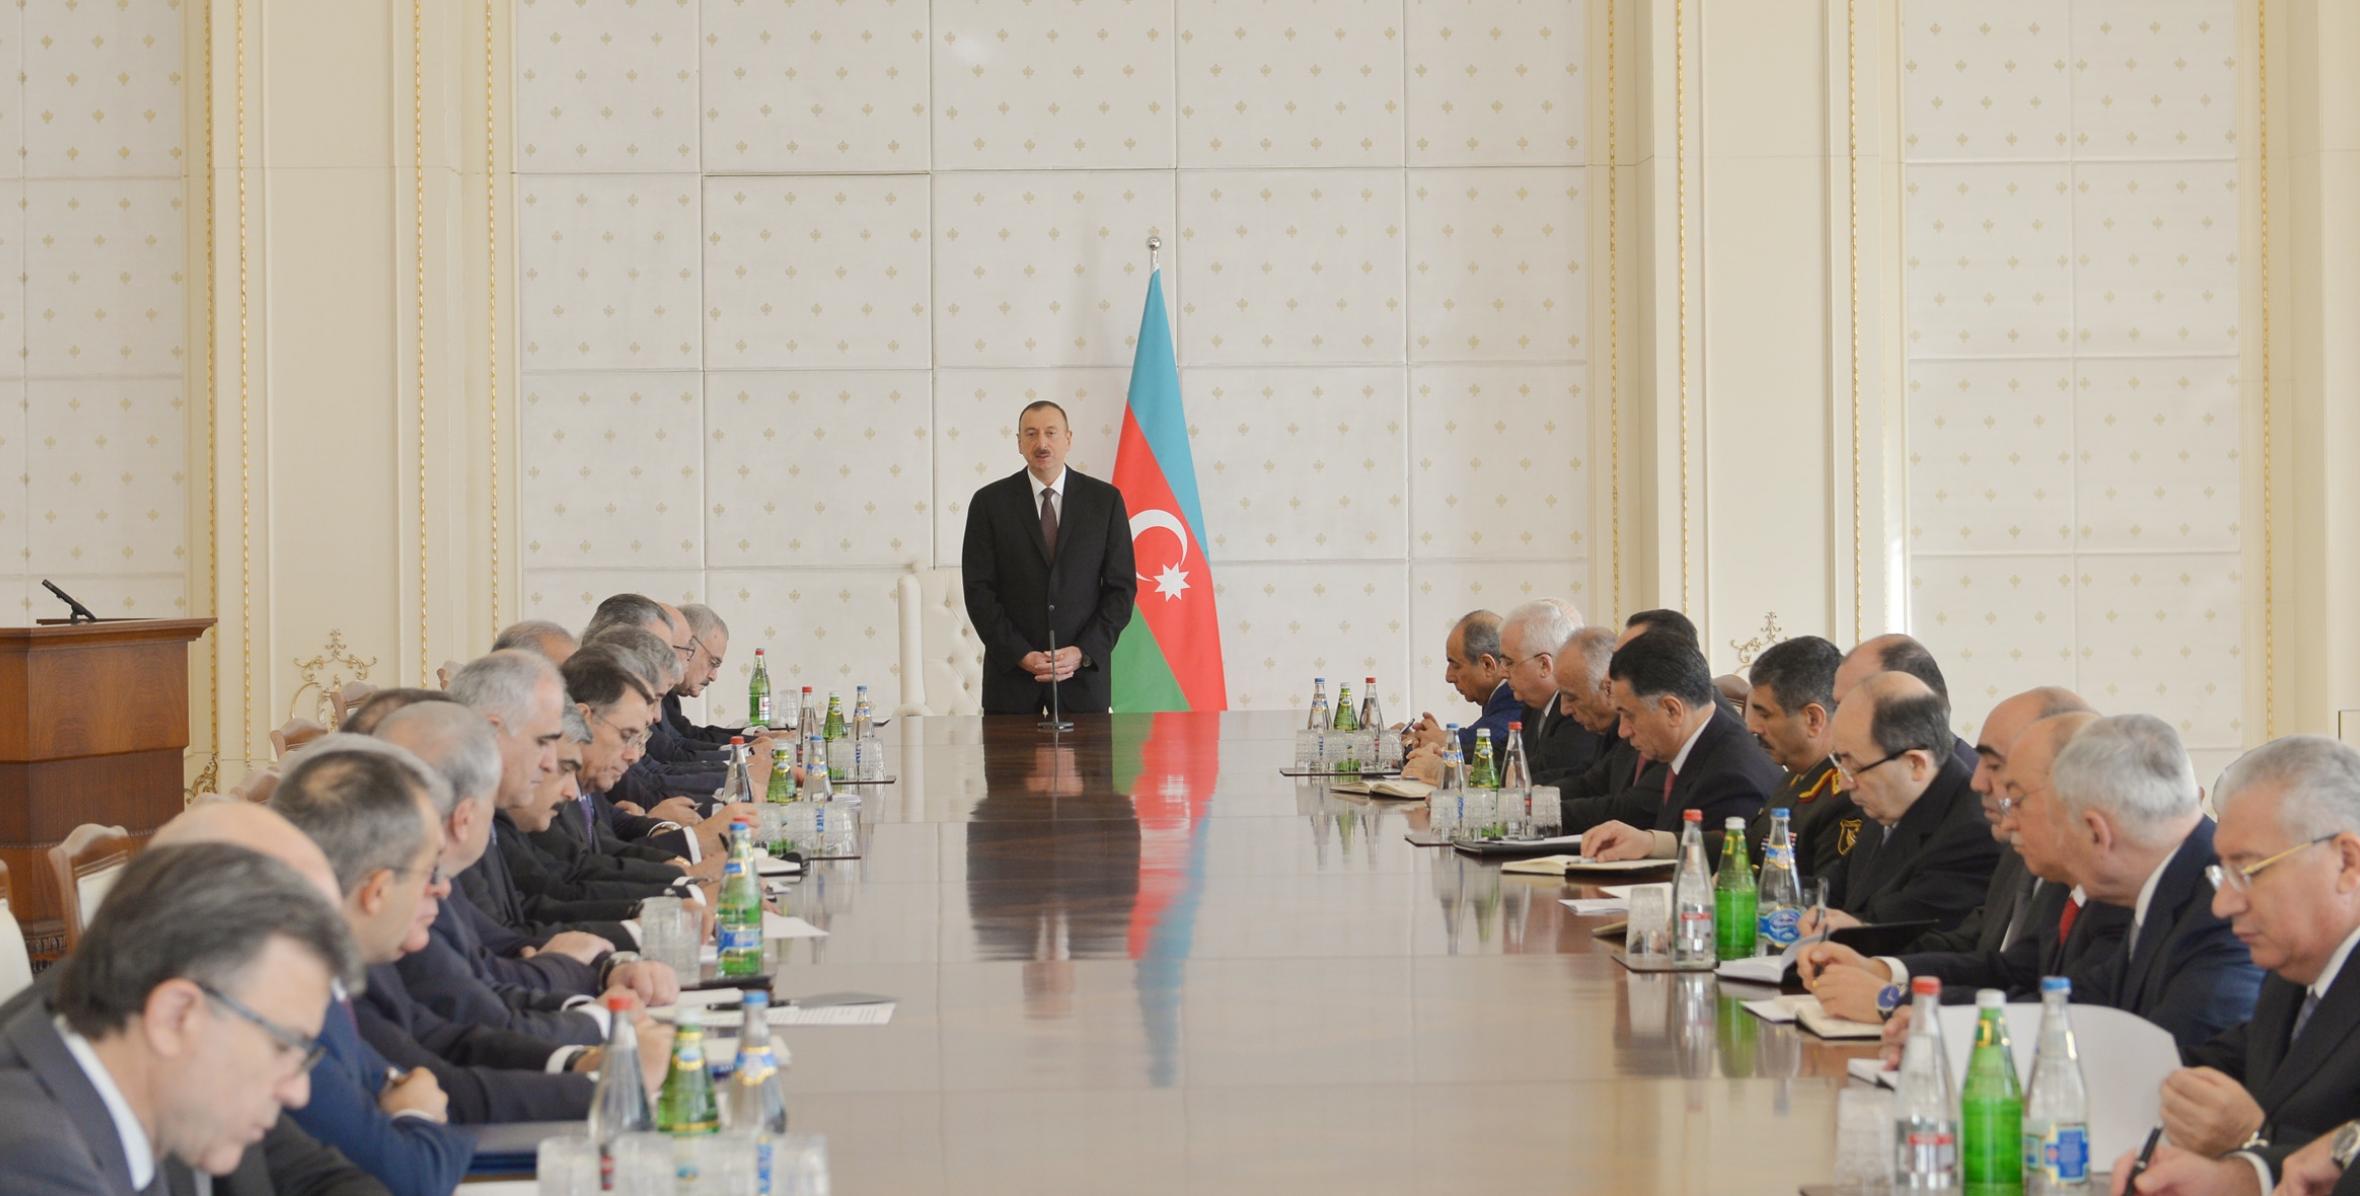 Ilham Aliyev chaired a meeting of the Cabinet of Ministers dedicated to the results of socioeconomic development in the first quarter of 2014 and objectives for the future